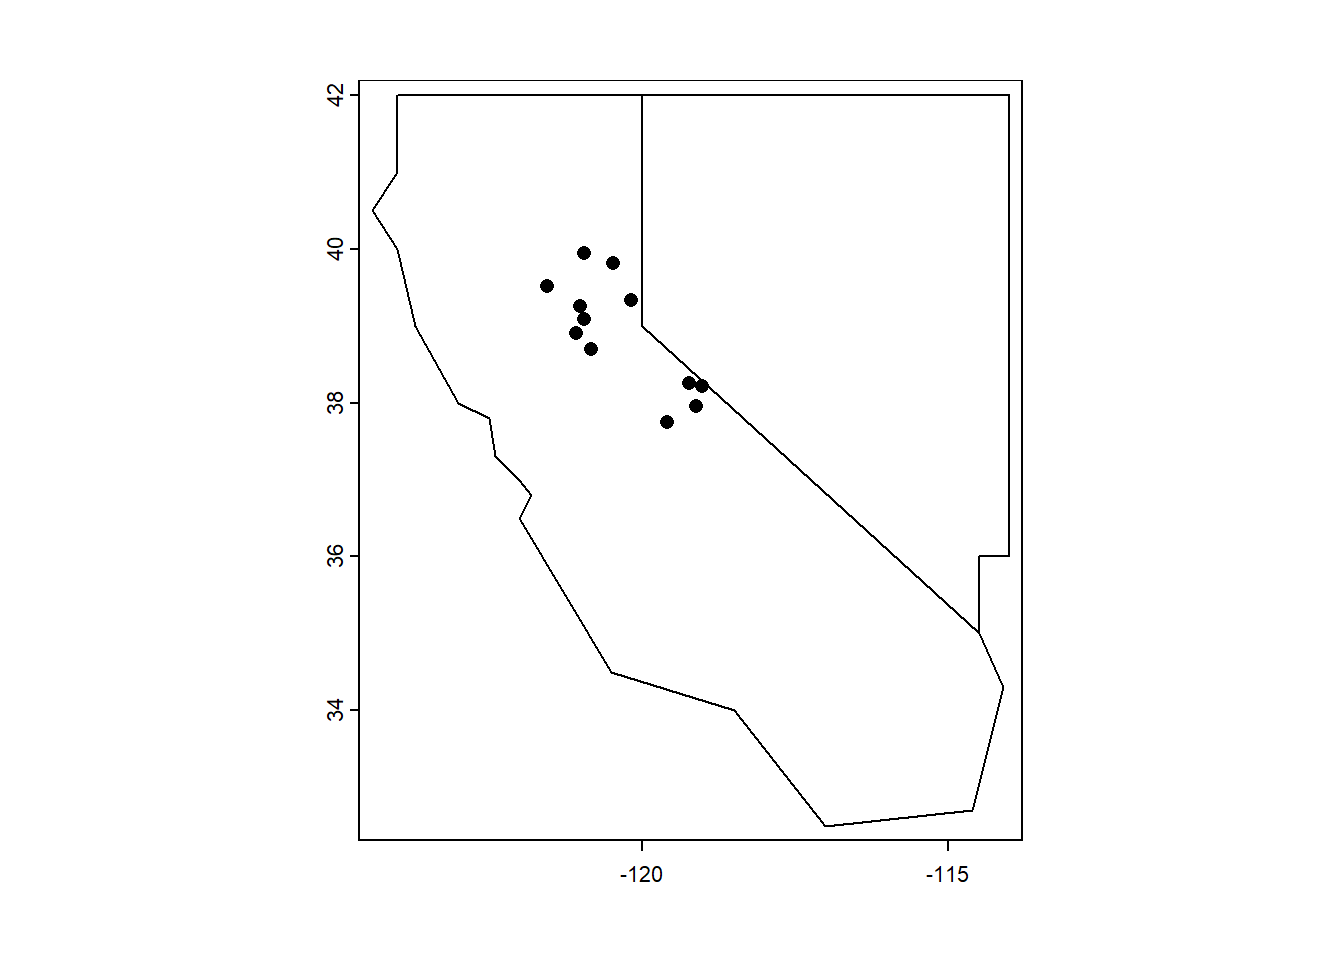 Base R plot of twostates and stations SpatVectors